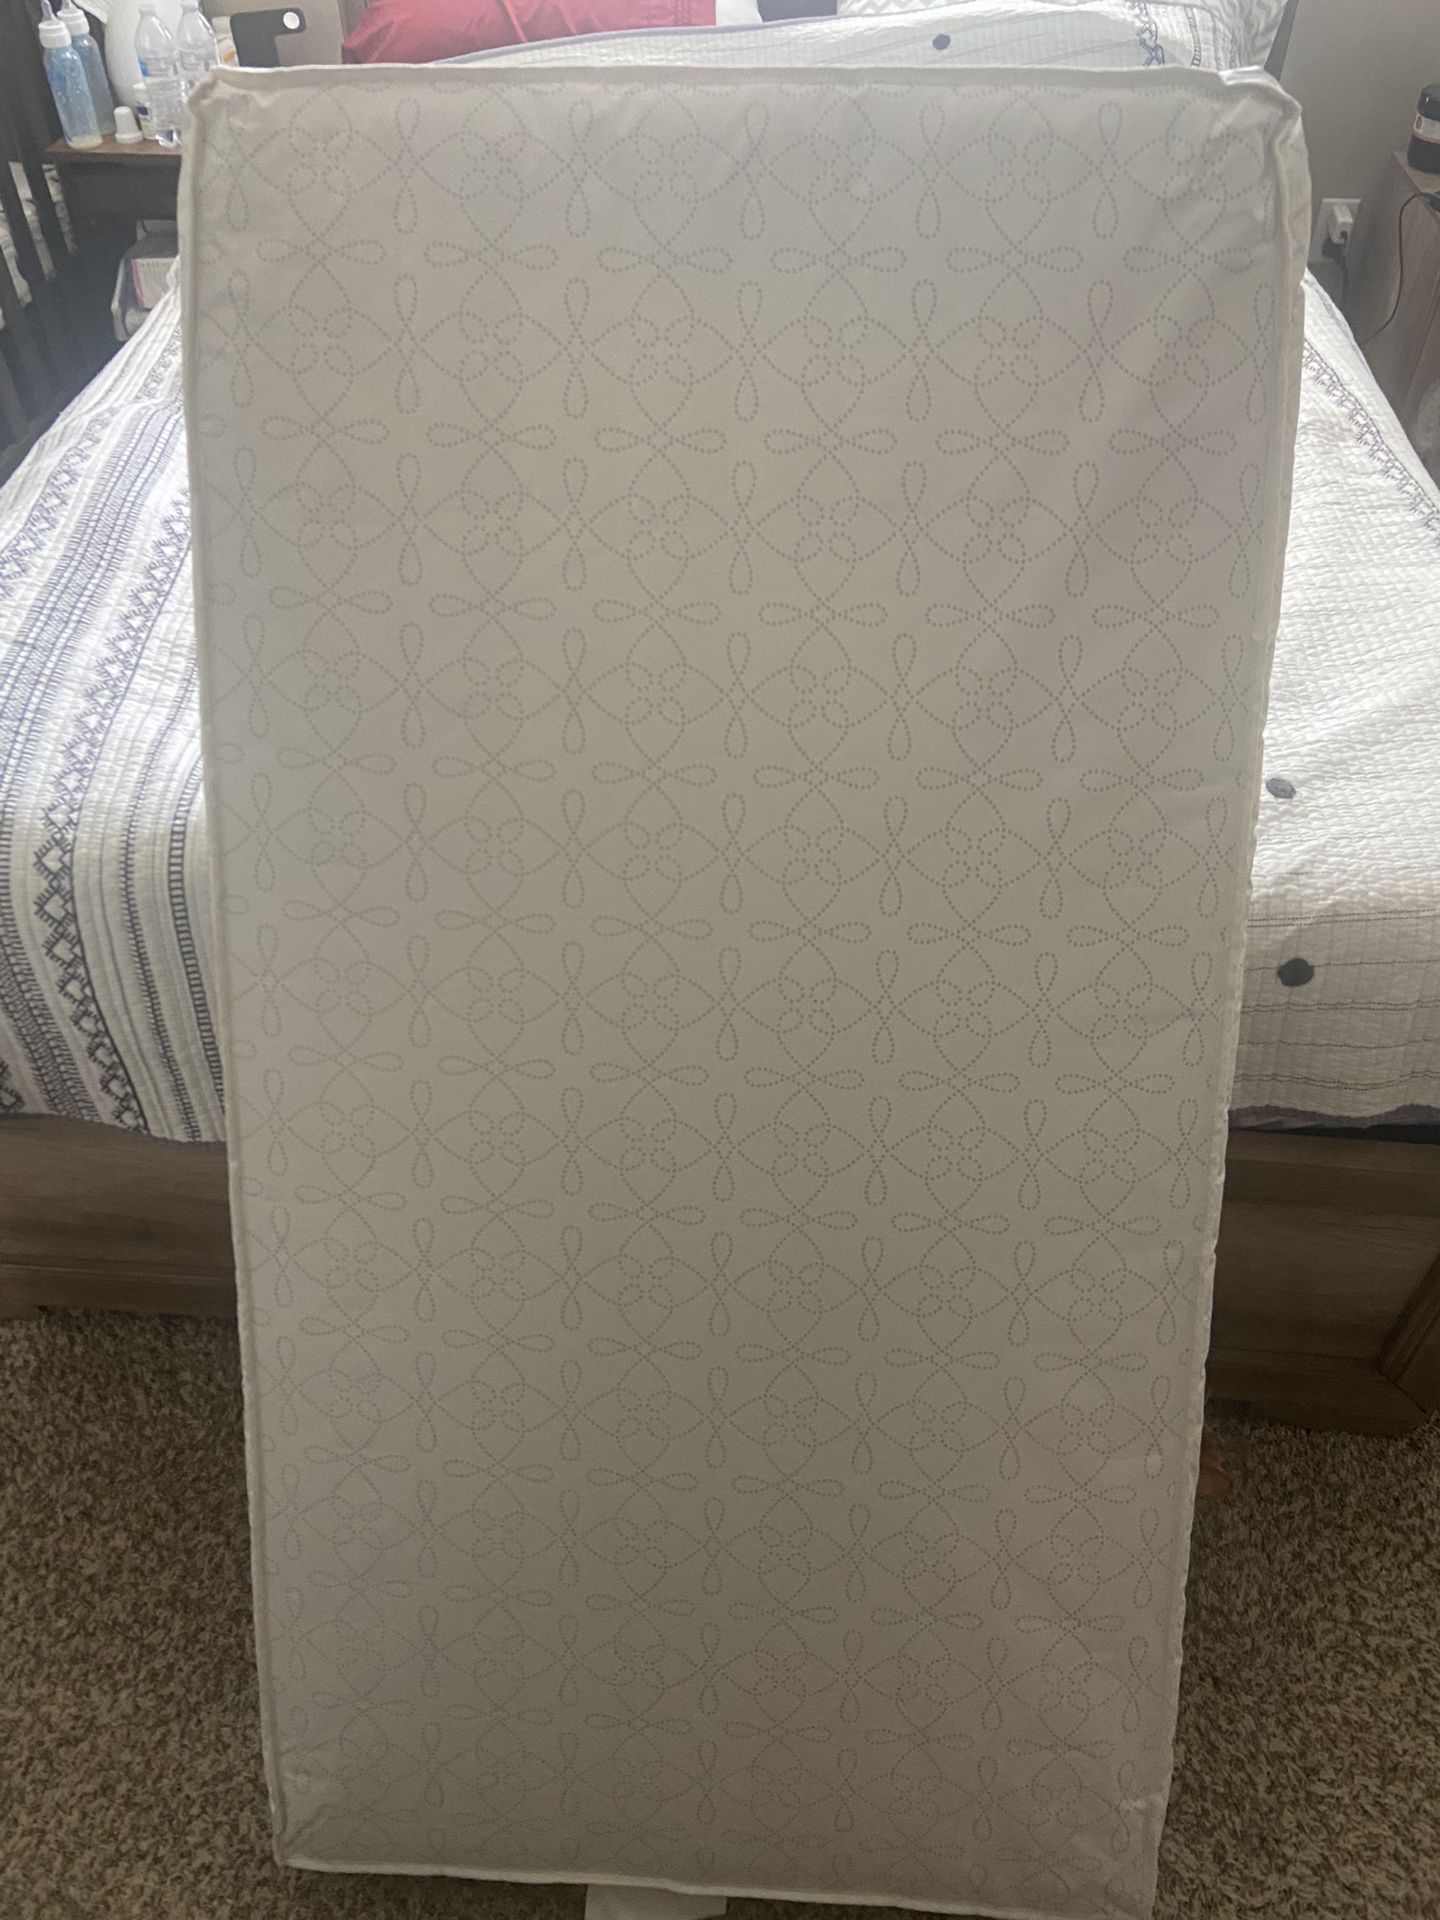 Gently Used Baby Mattress 